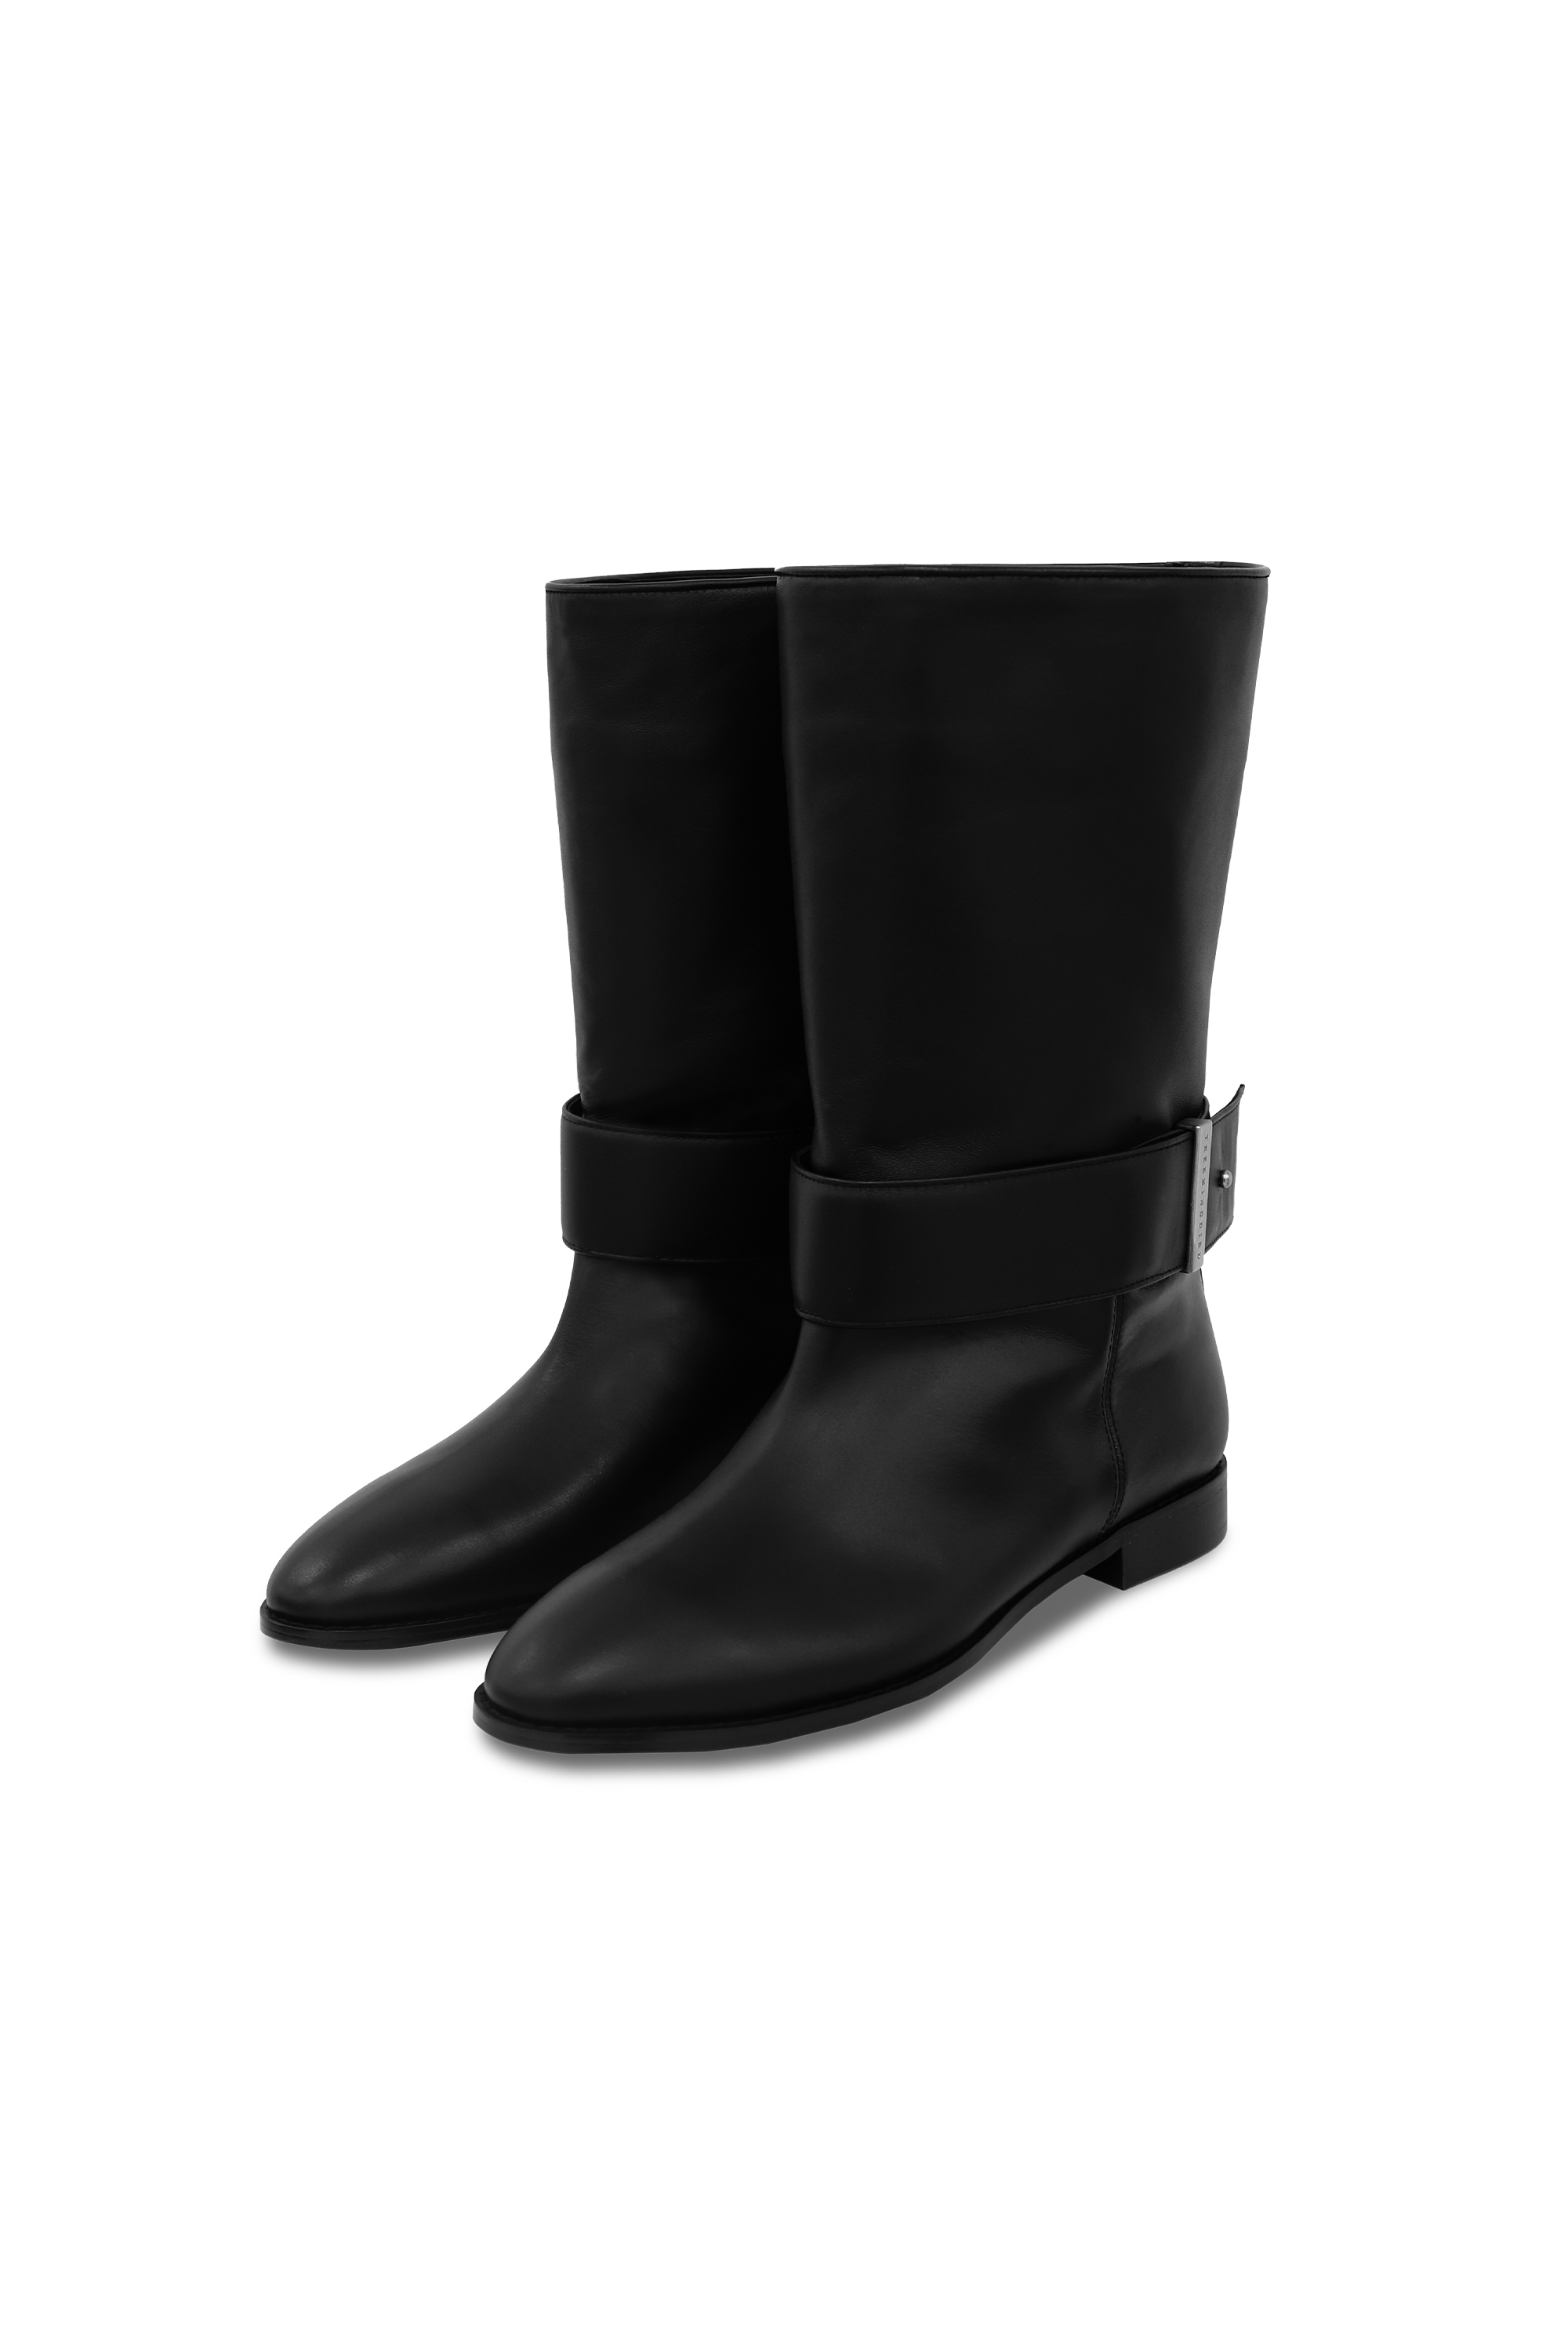 HANDMADE) Cowhide Belted Middle Boots [ Black ]